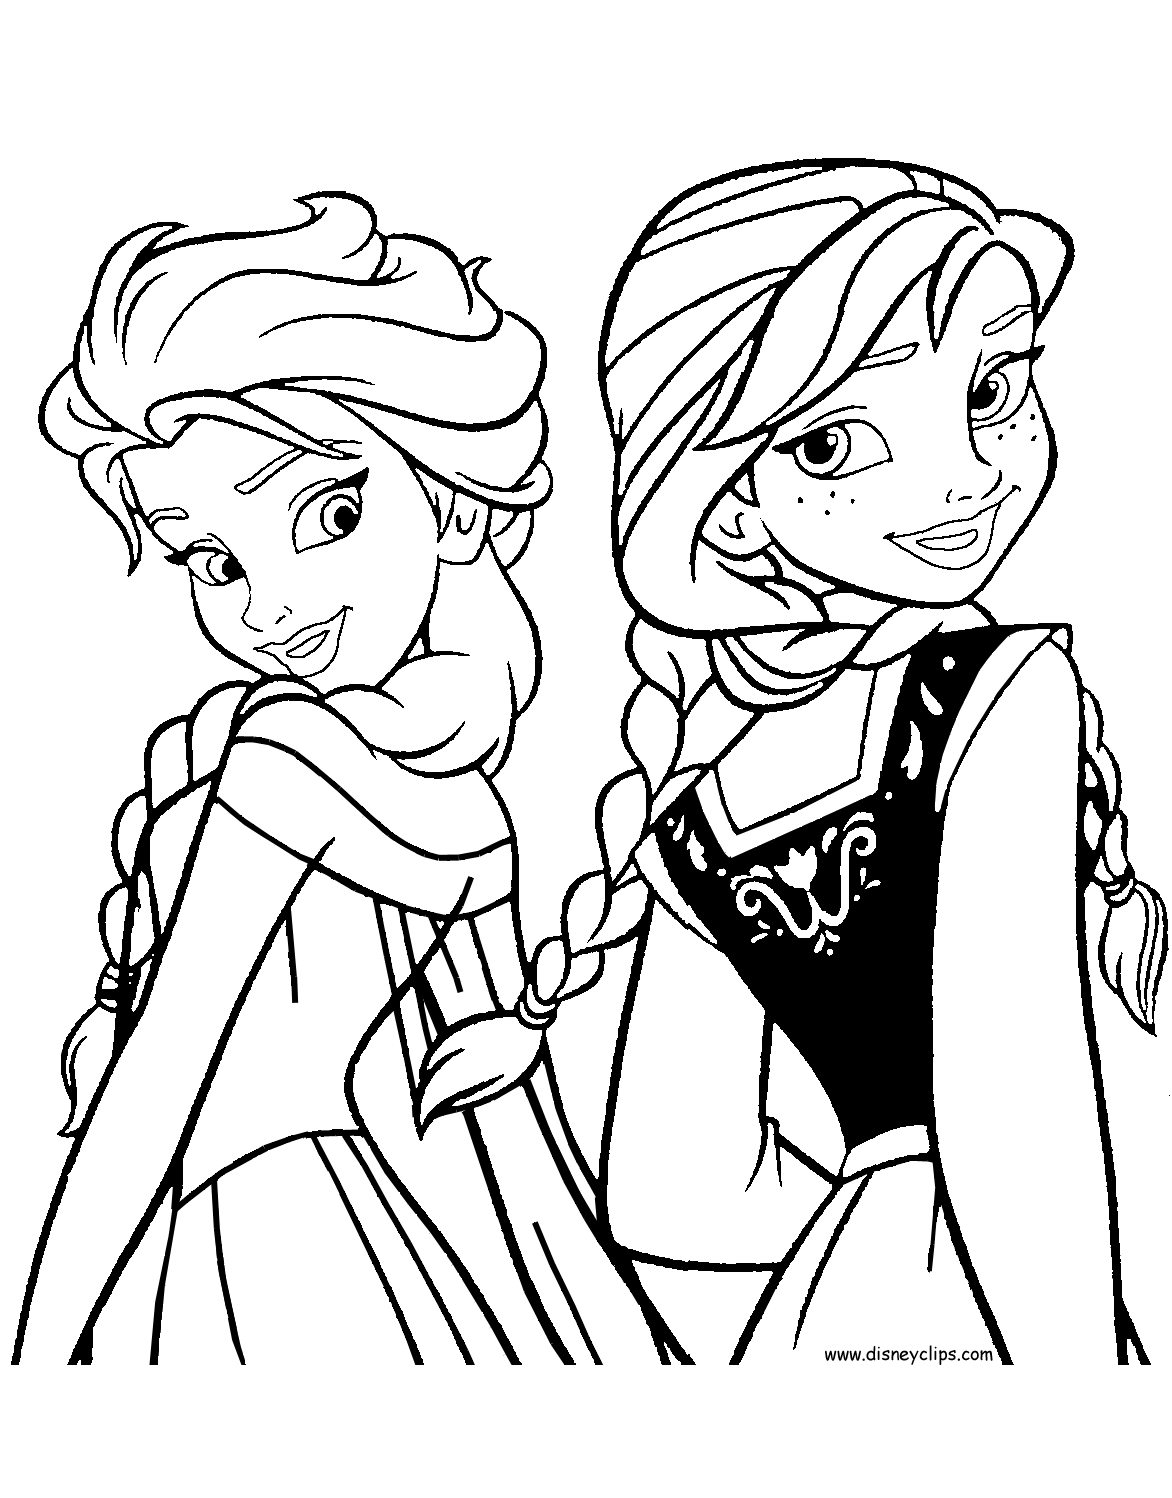 pictures of frozen to color 15 beautiful disney frozen coloring pages free instant of pictures color to frozen 